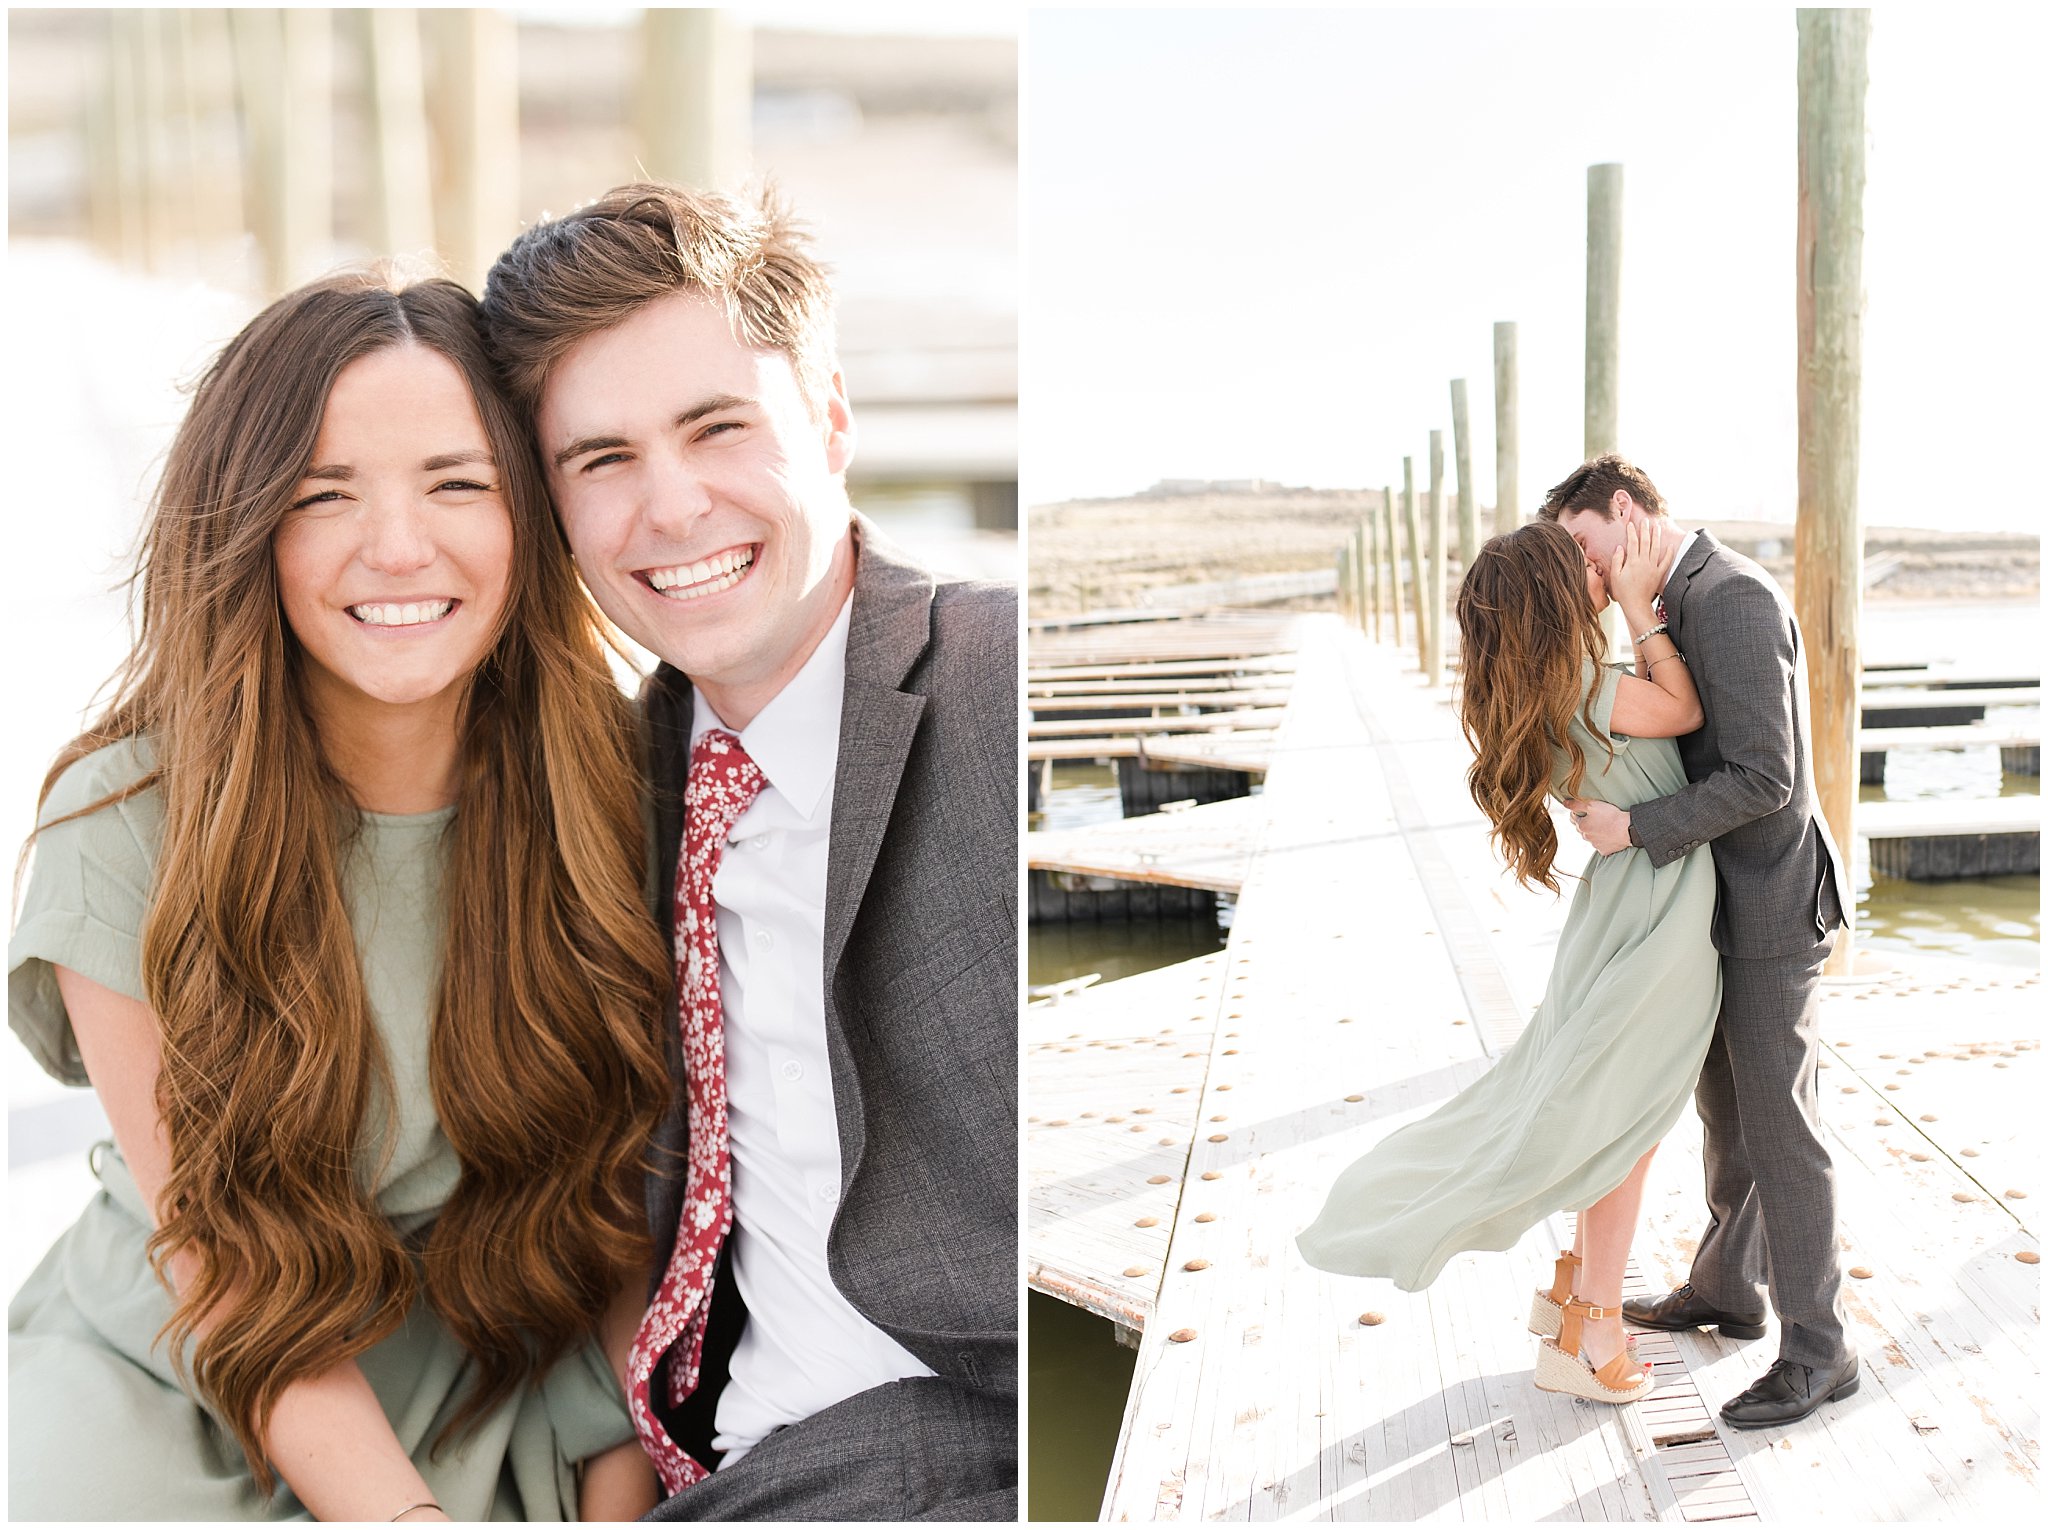 Couple dressed up for Antelope Island Engagement with bouquet | Antelope Island Engagements | Utah Wedding Photographers | Jessie and Dallin Photography